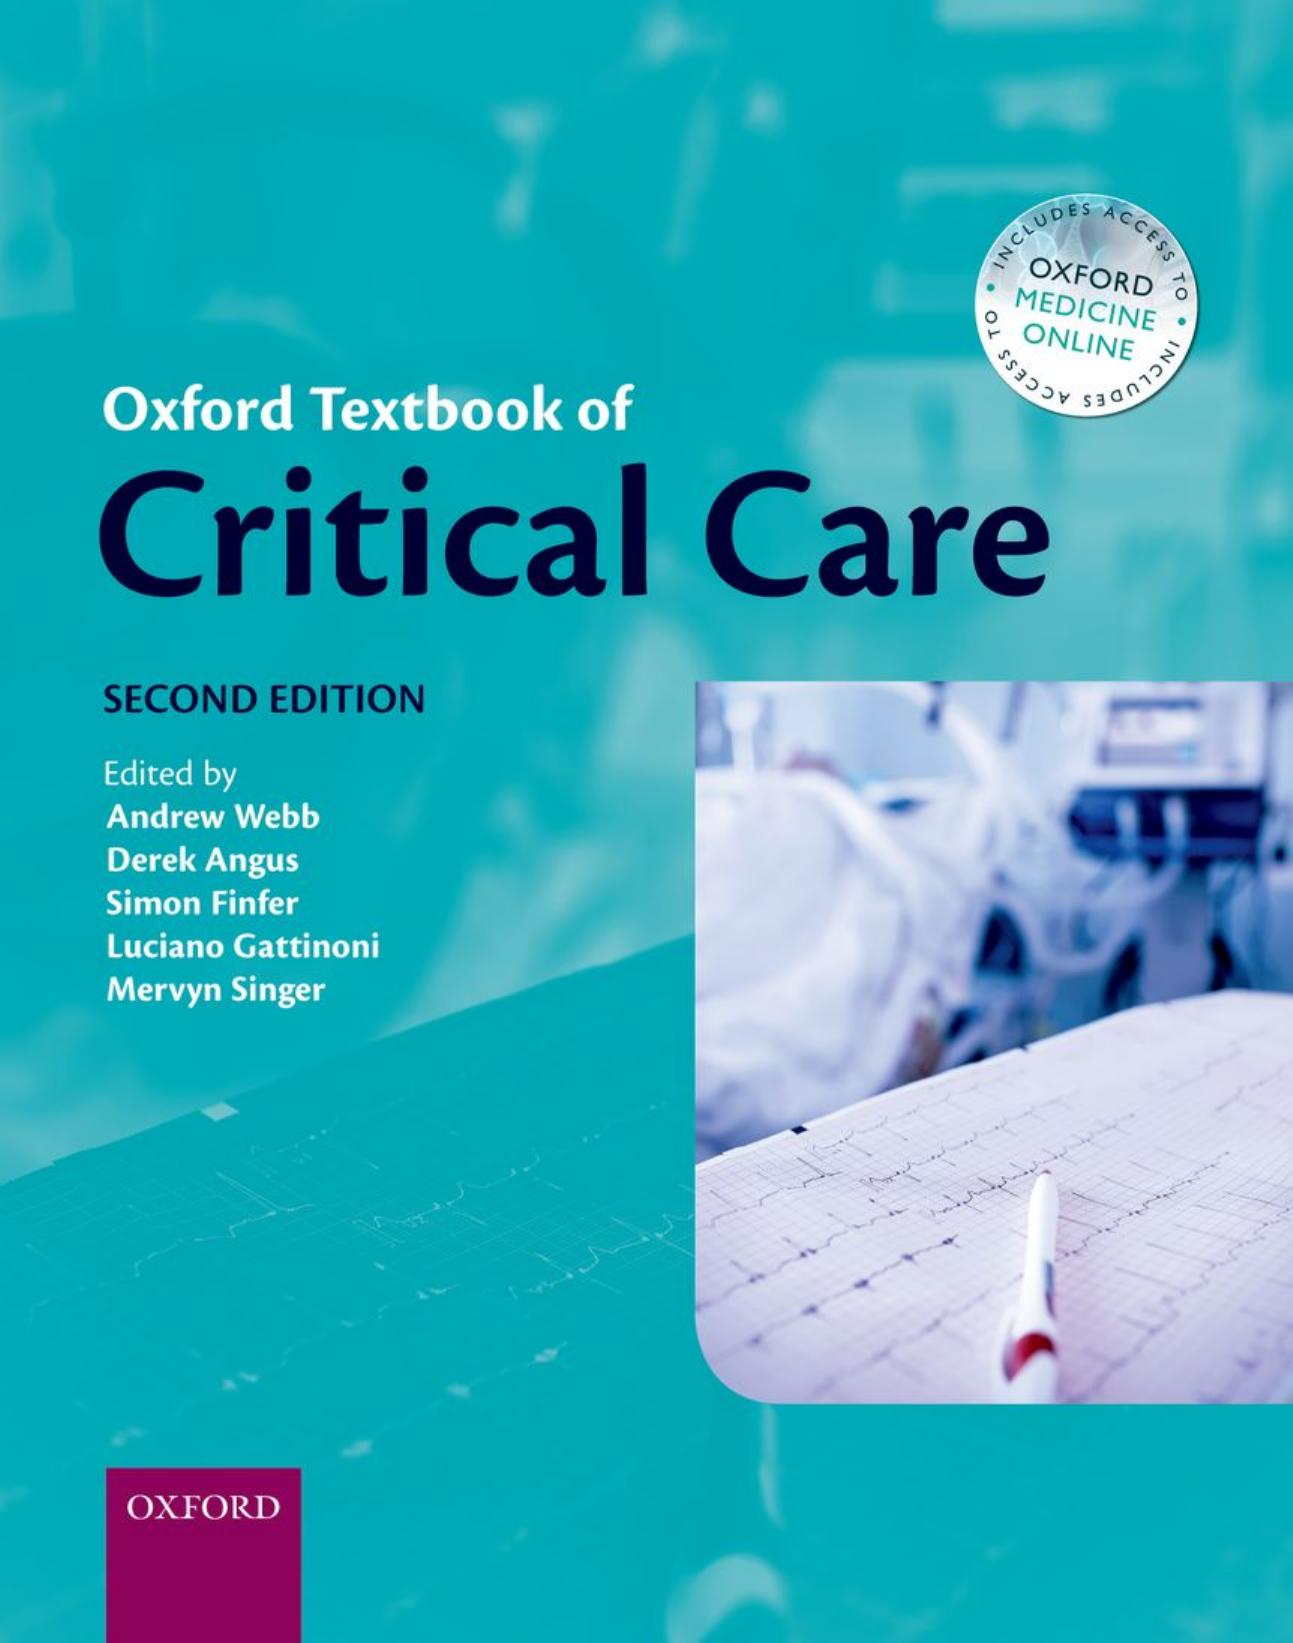 Oxford Textbook of Critical Care 2016